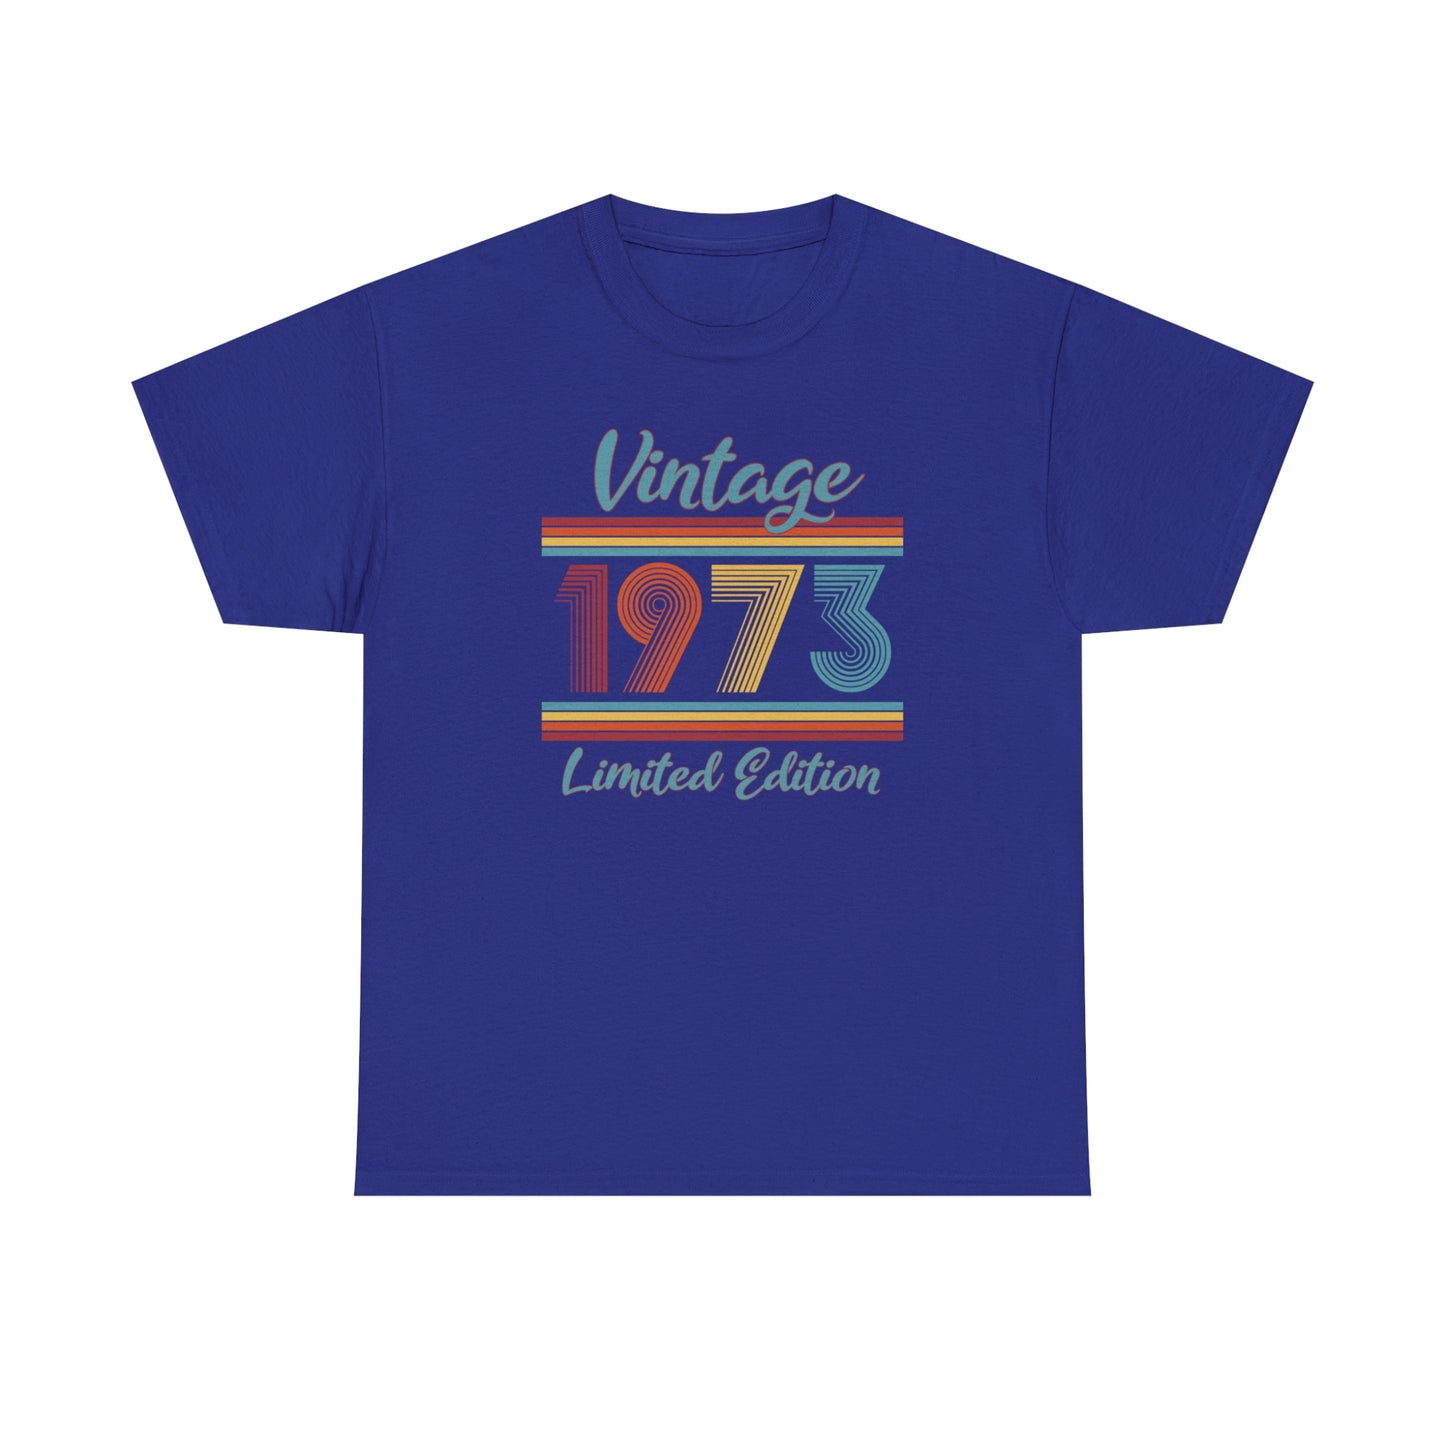 Vintage 1973 T-Shirt For Limited Edition TShirt For Reunion T Shirt For Retro Birthday Shirt For Birth Year Shirt For Graduation Year T-Shirt